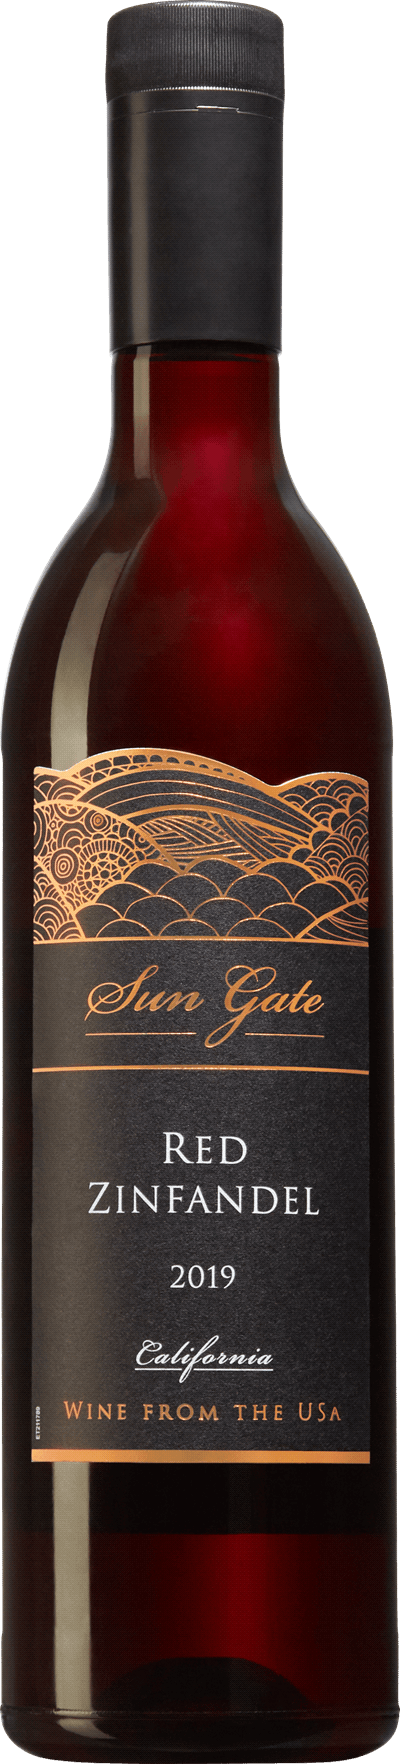 Sun Gate | Systembolaget